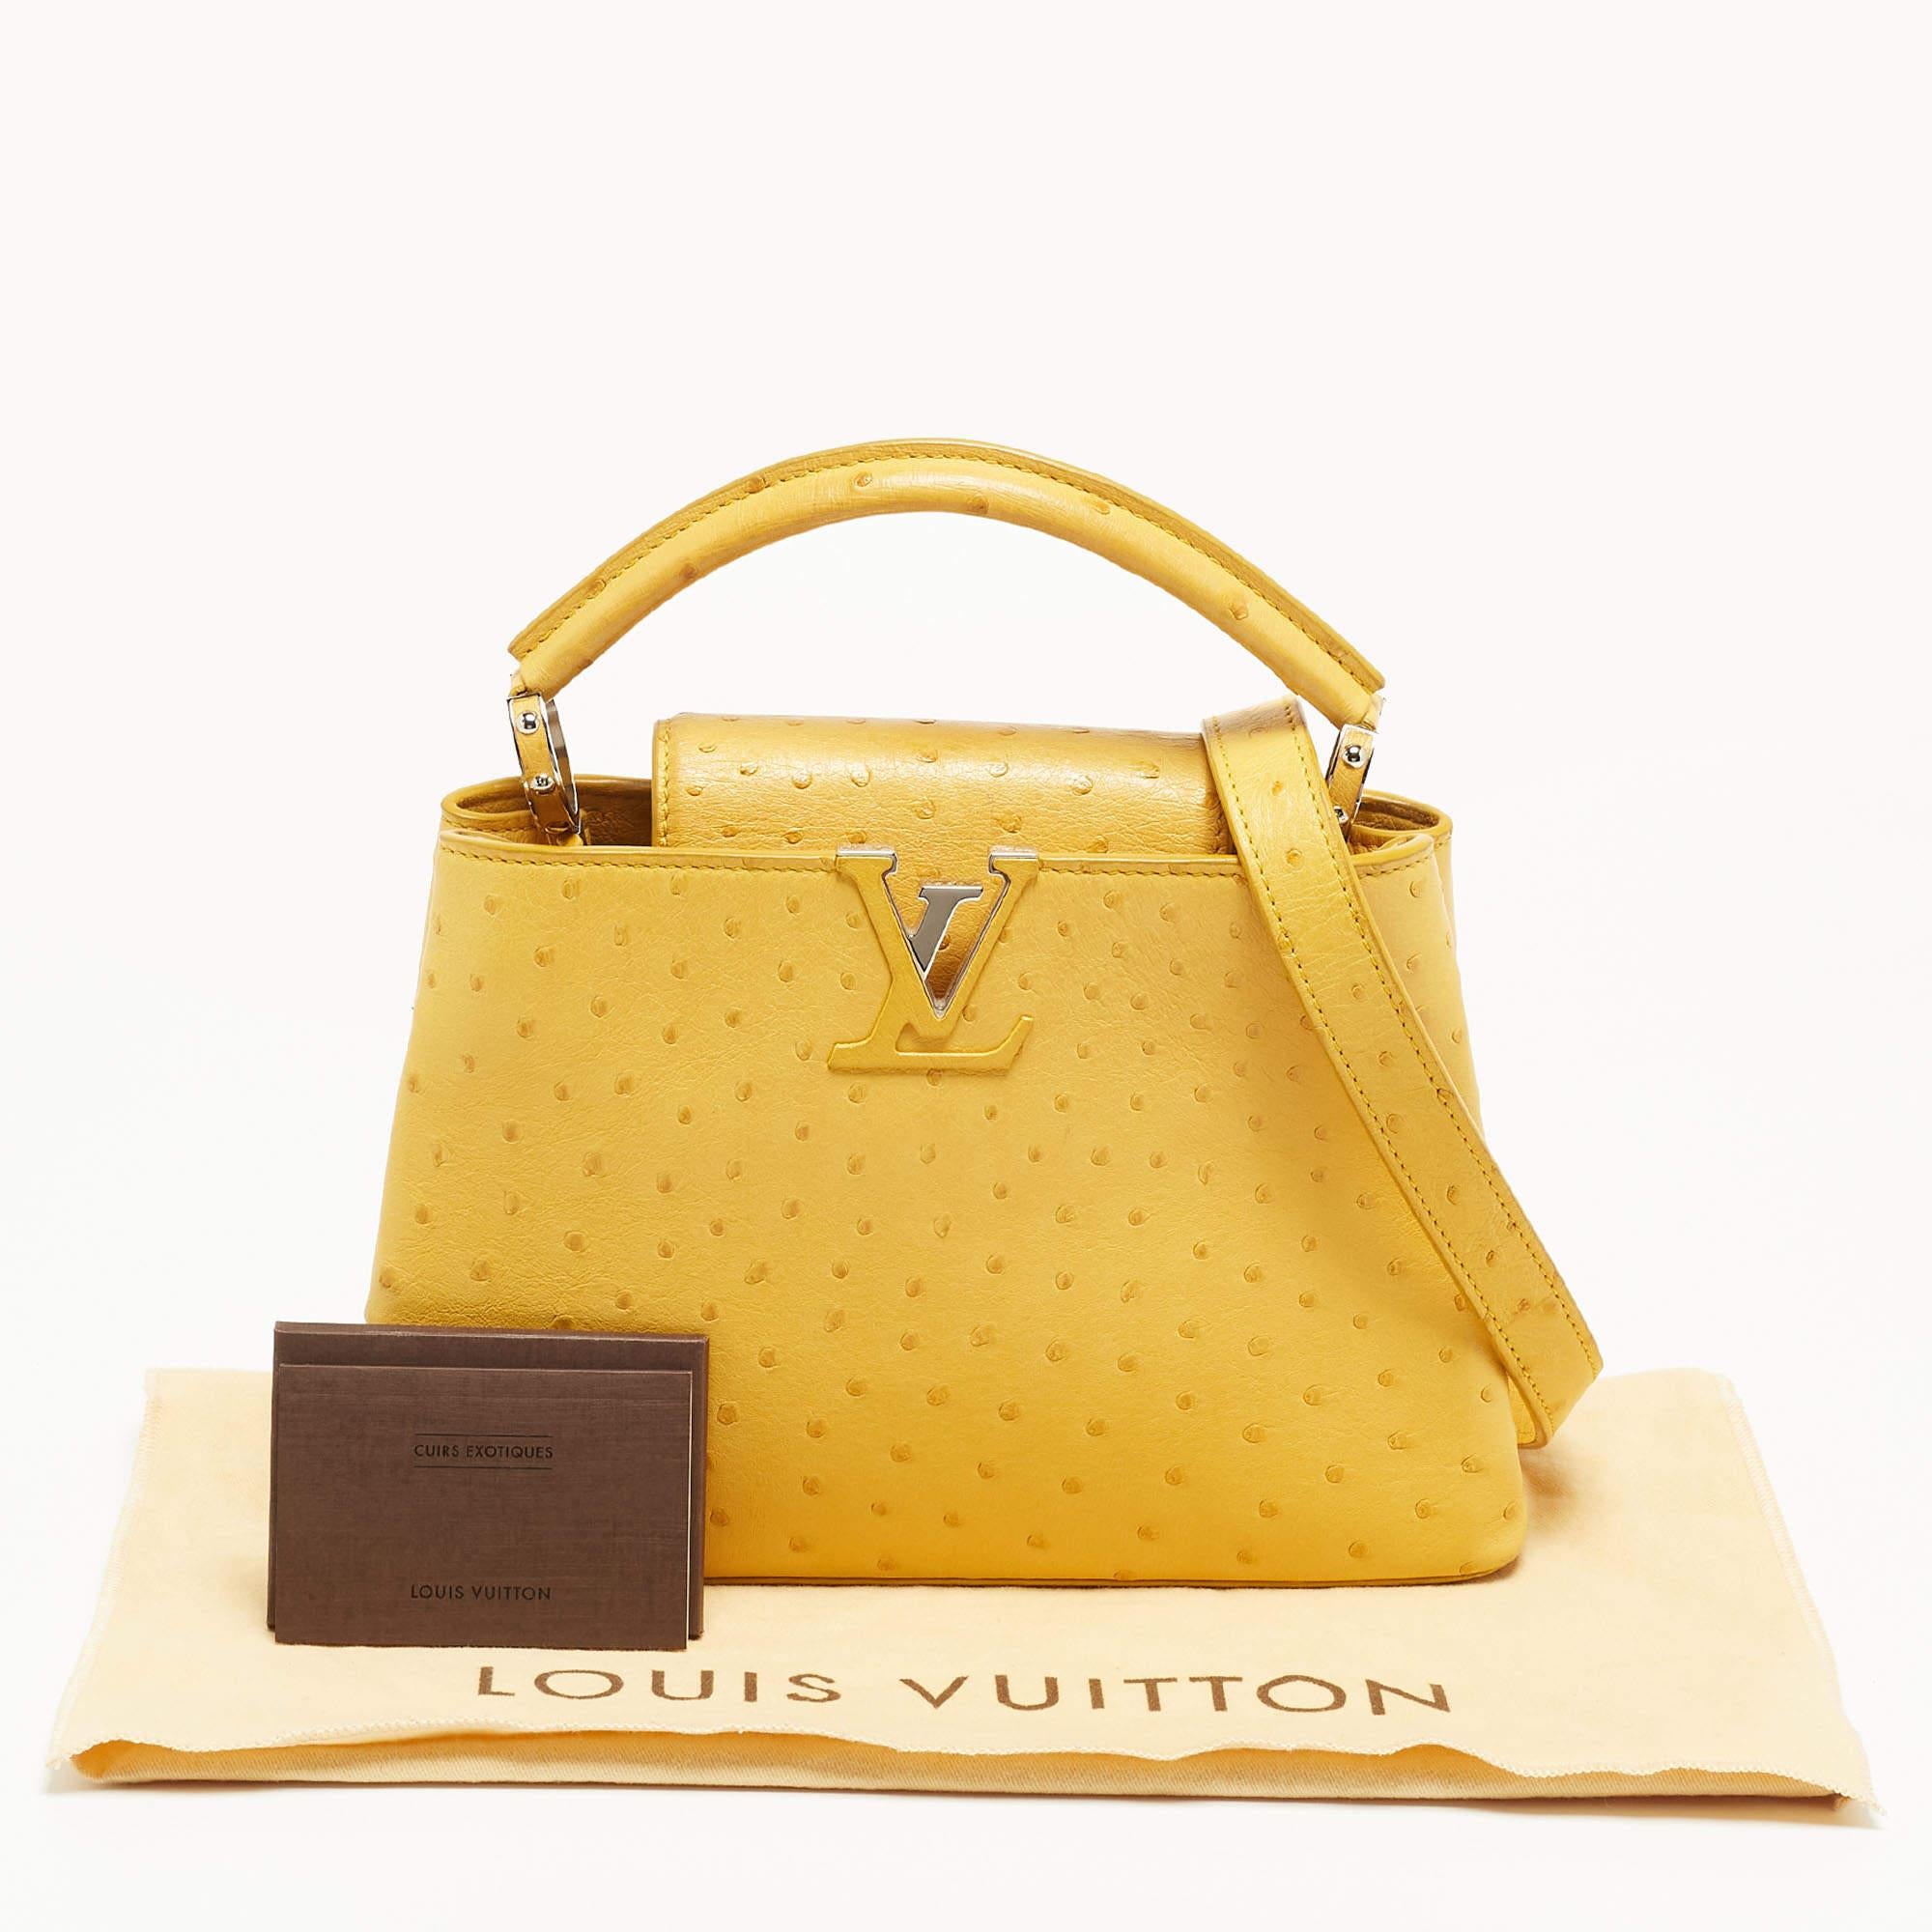 Louis Vuitton Yellow Ostrich Leather Capucines BB Bag 16